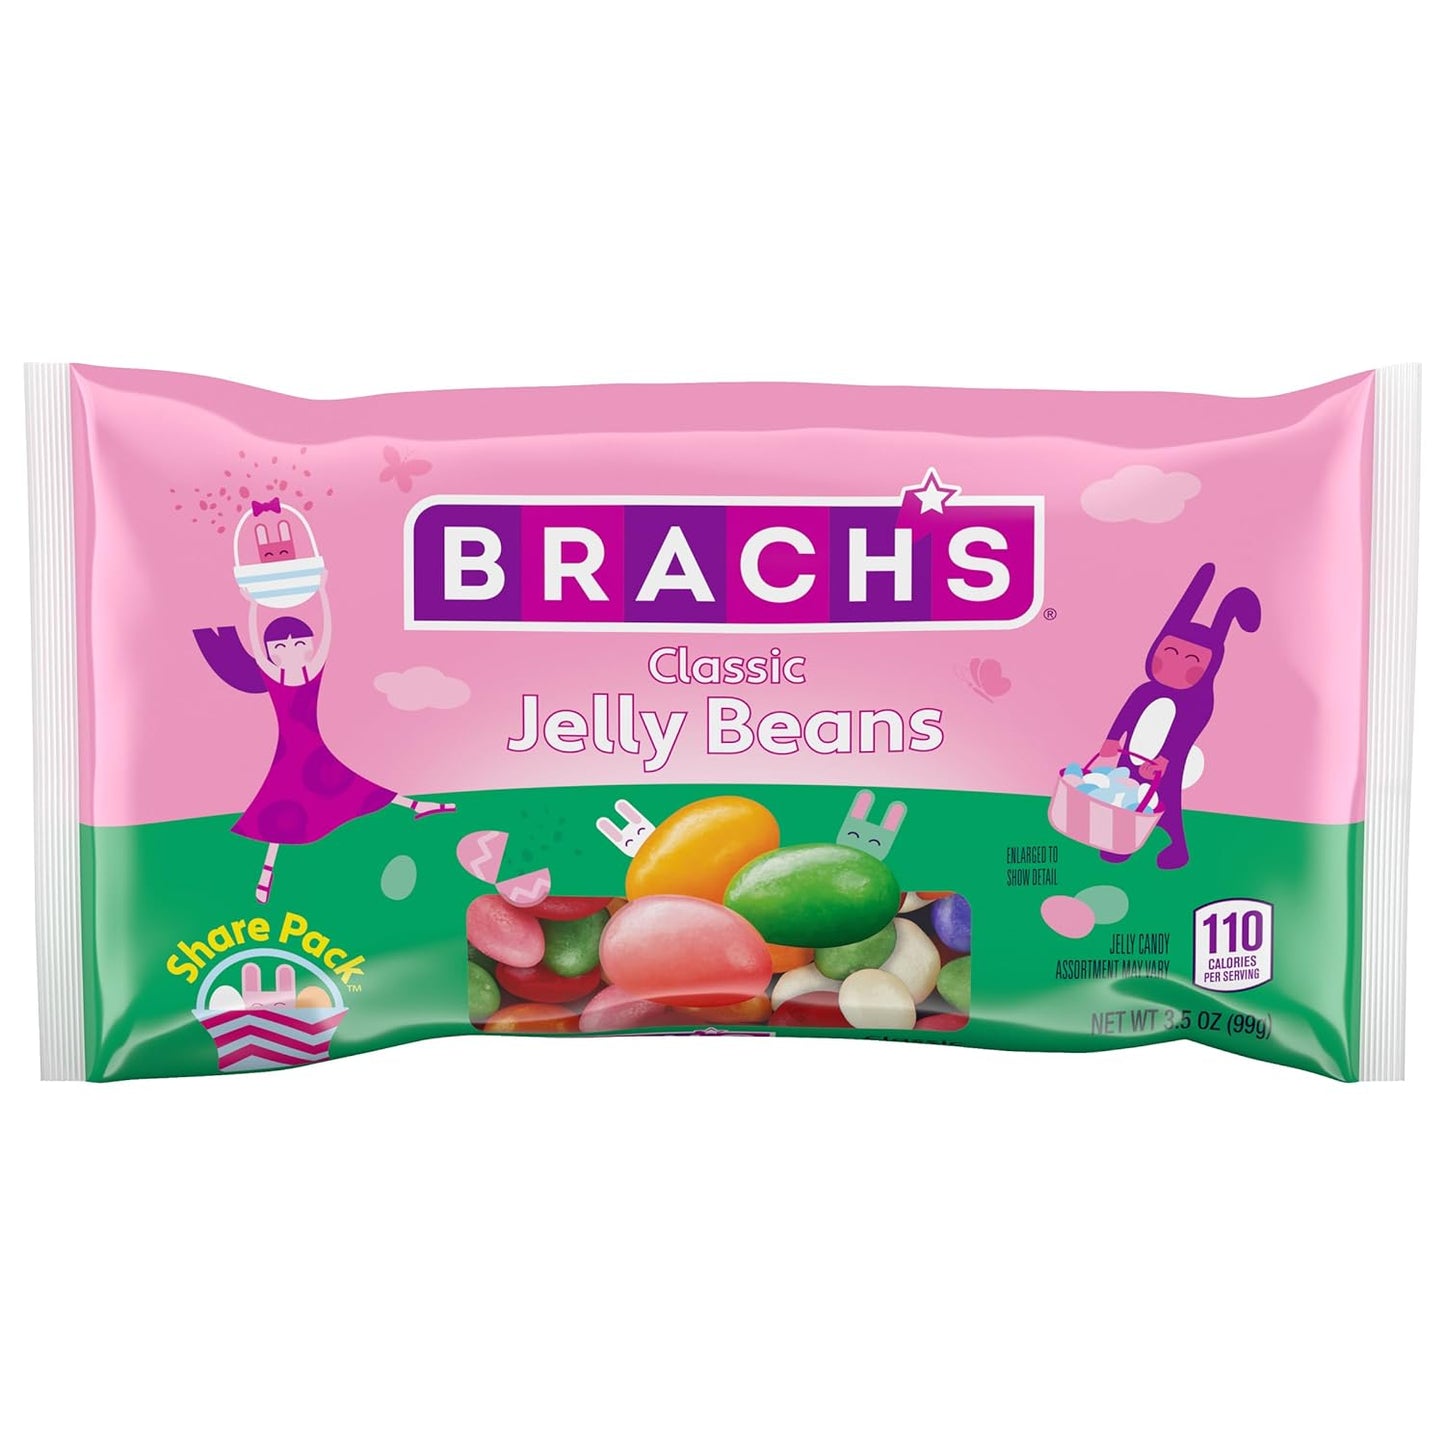 Brach's Easter Jelly Beans, Easter Candy, 3.5 Ounce, 12 count